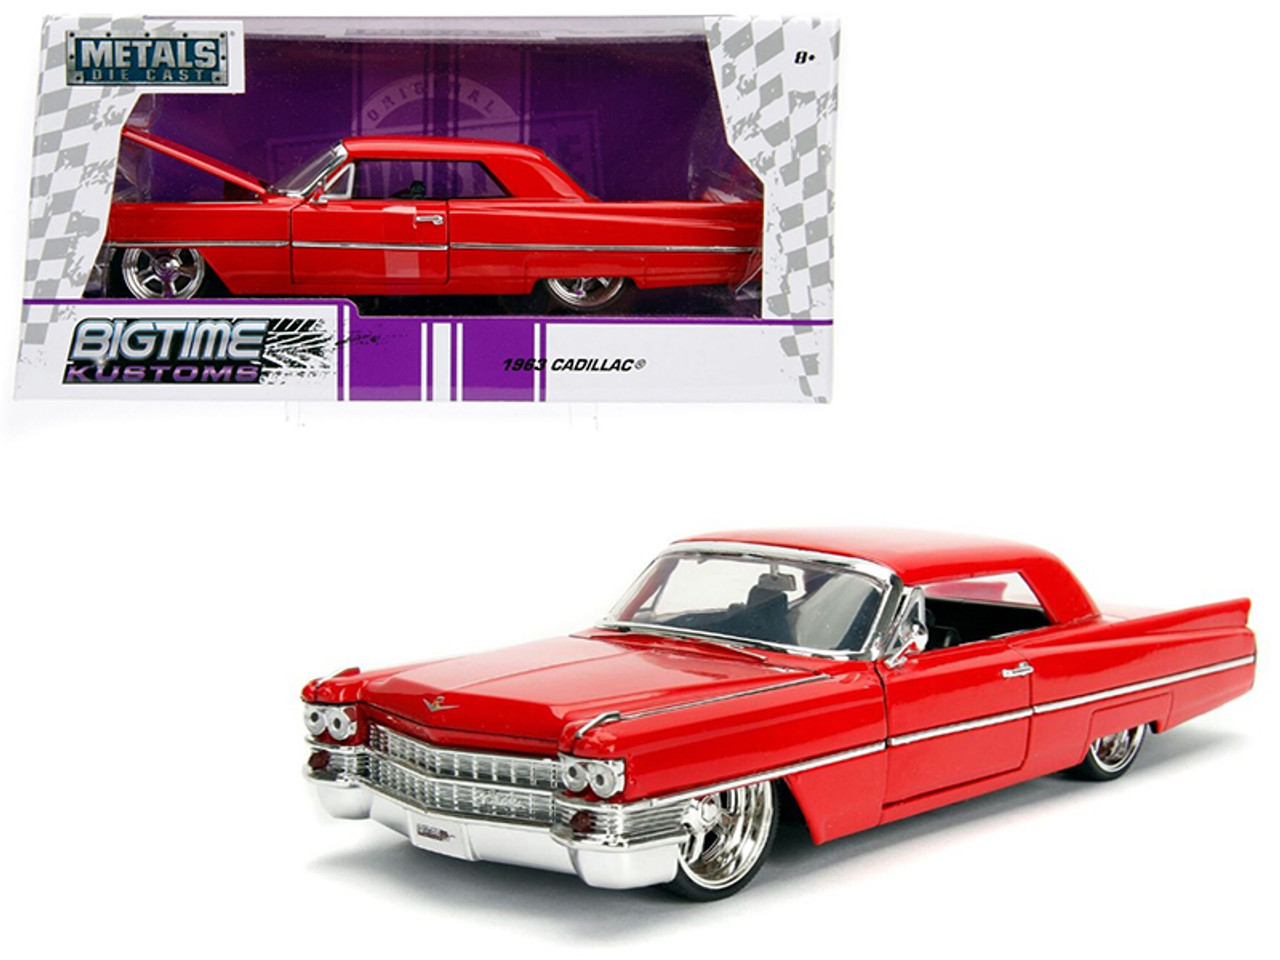 1963 Cadillac Red "Bigtime Kustoms" 1/24 Diecast Model Car by Jada (NO RETAIL BOX)